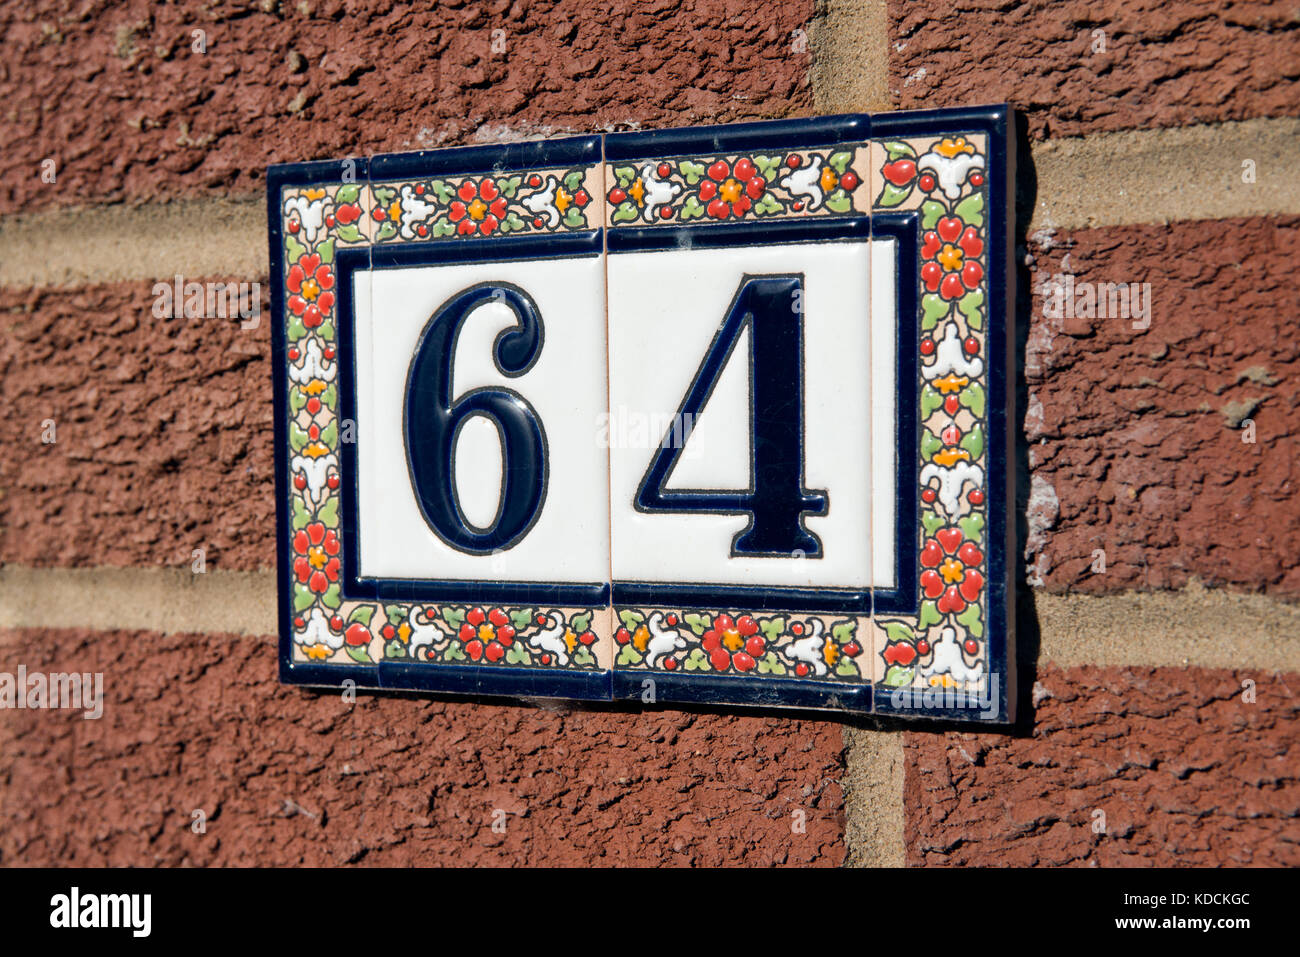 The number sixty four constructed from decorative ceramic tiles, attached to a red brick wall. Signifying the address of a UK home. Stock Photo